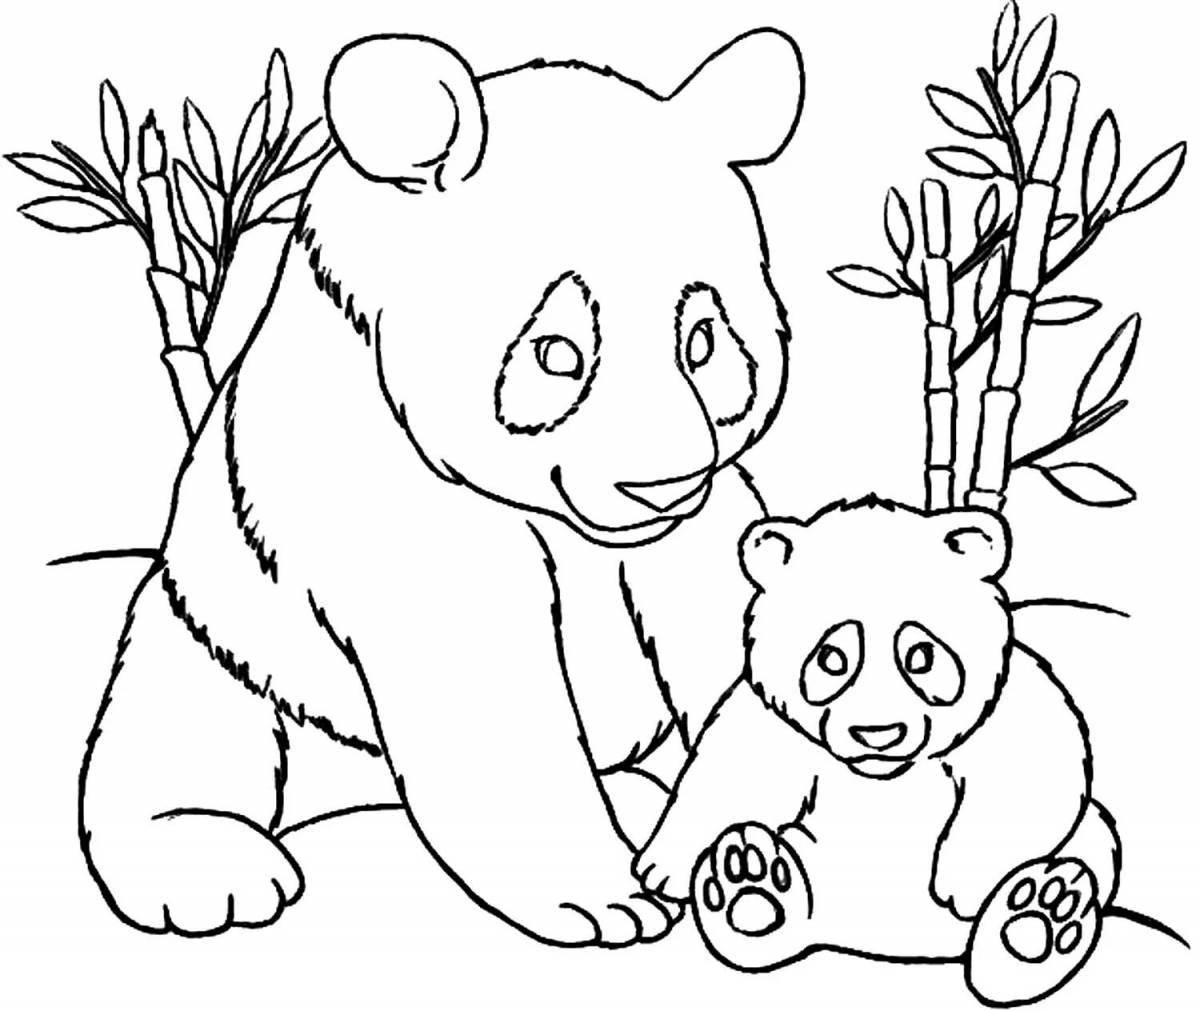 Exalted animal coloring pages pdf